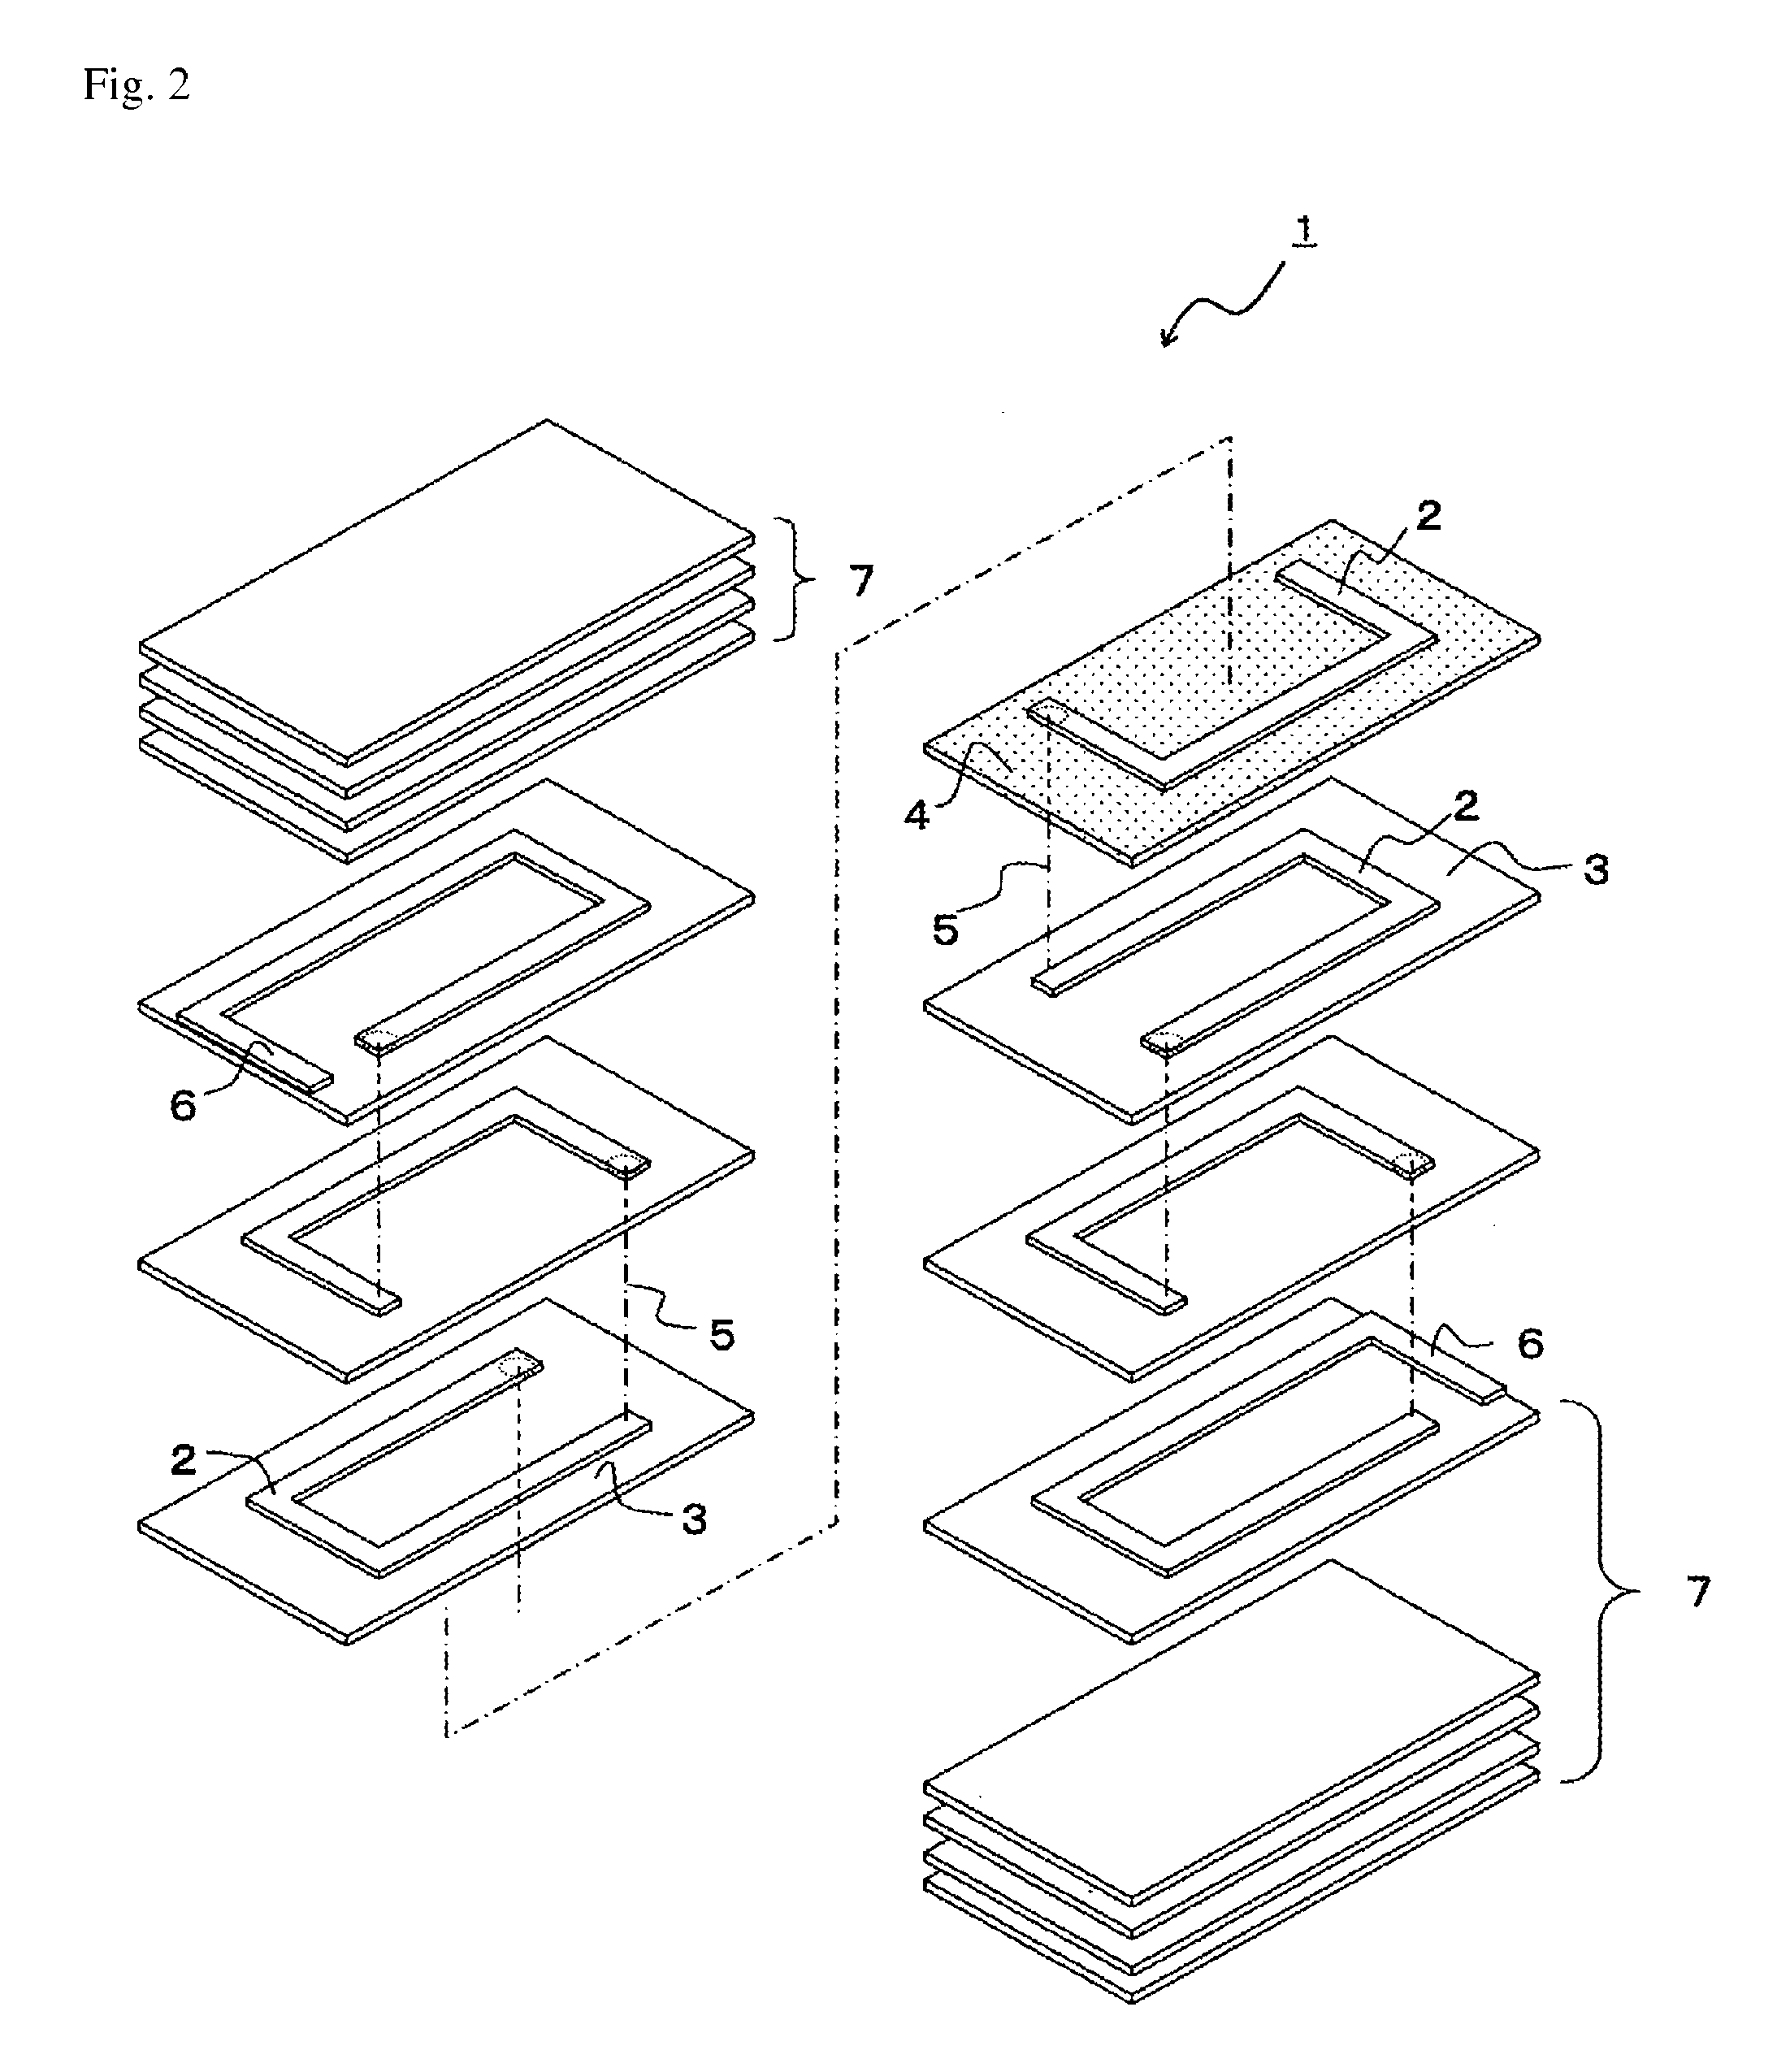 Laminated inductor, method for manufacturing the laminated inductor, and laminated choke coil